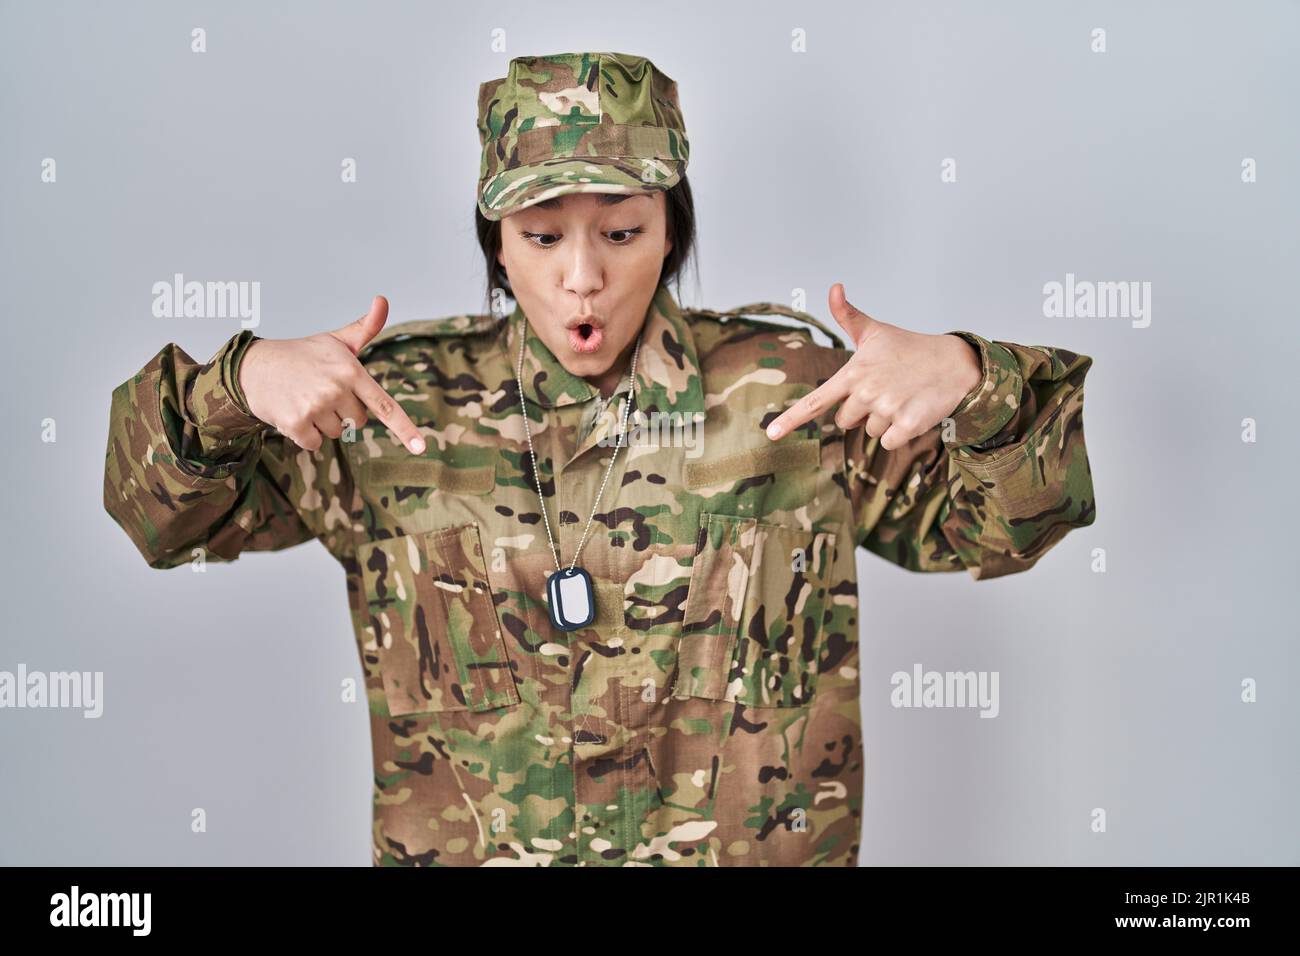 Young south asian woman wearing camouflage army uniform pointing down with fingers showing advertisement, surprised face and open mouth Stock Photo